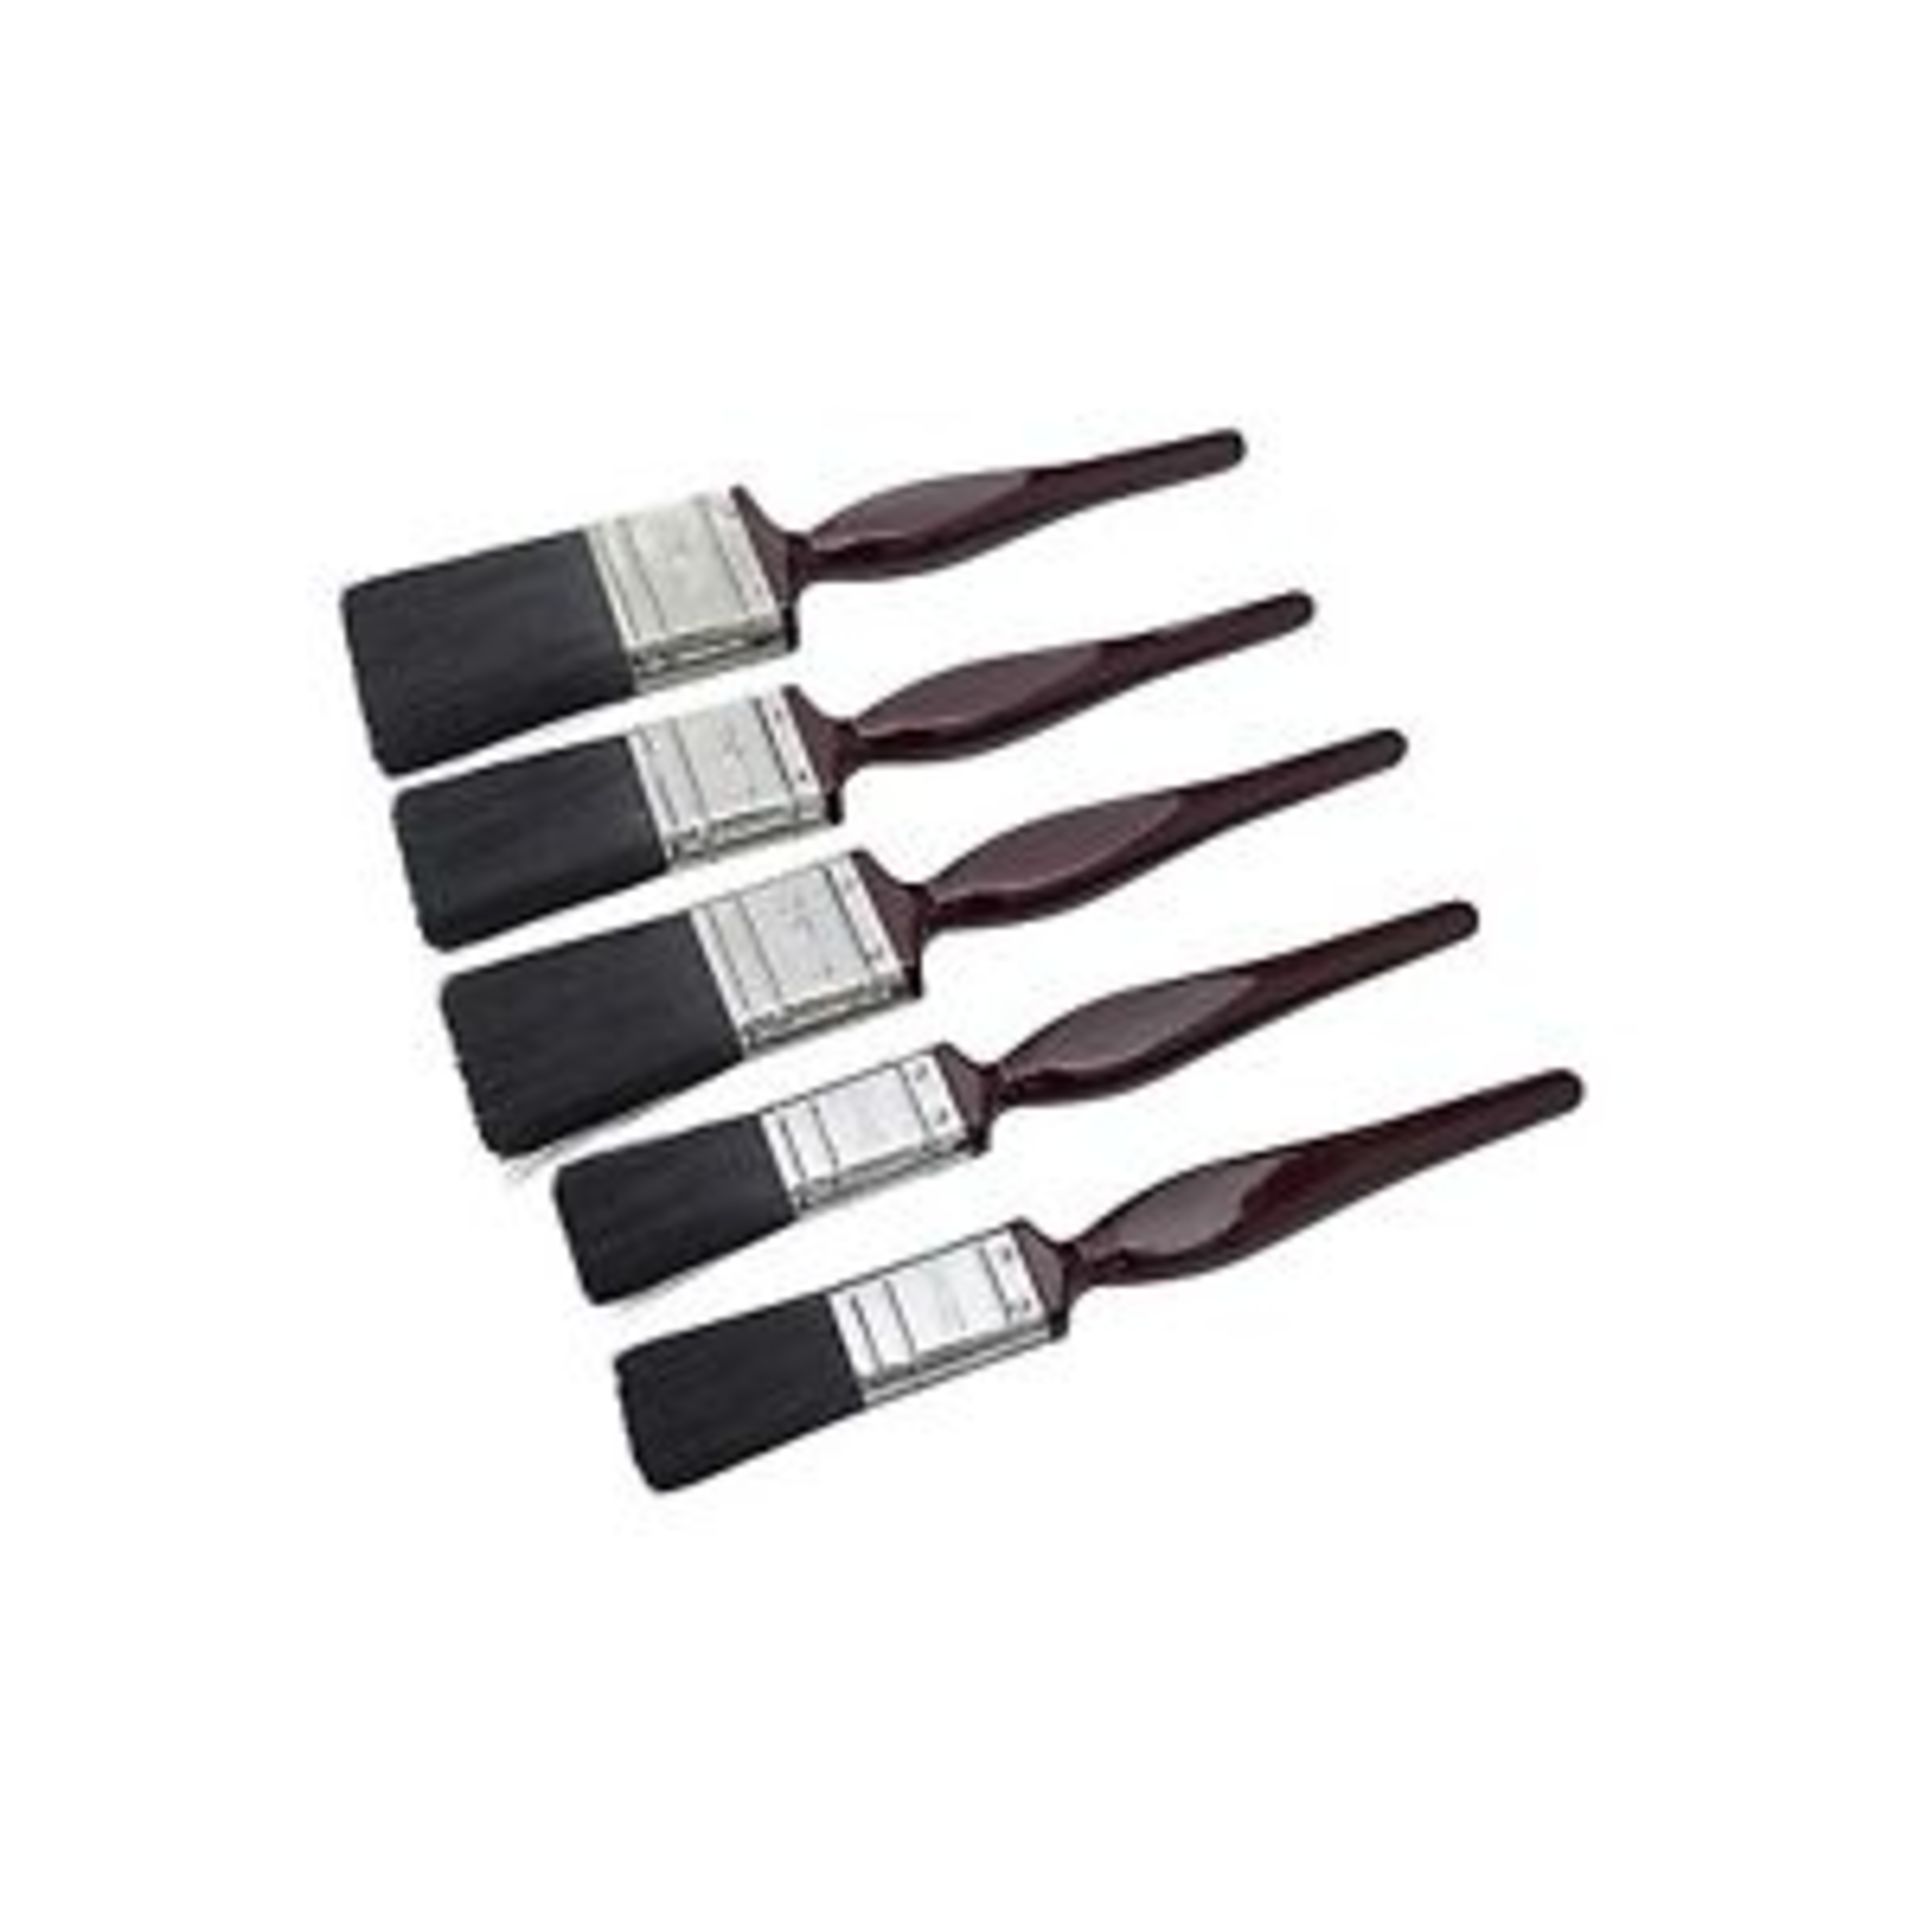 V Brand New High Quality 5 Piece Synthetic No Loss Paint Brush Set Includes 2 x 25 mm, 2 x 38 mm & 1